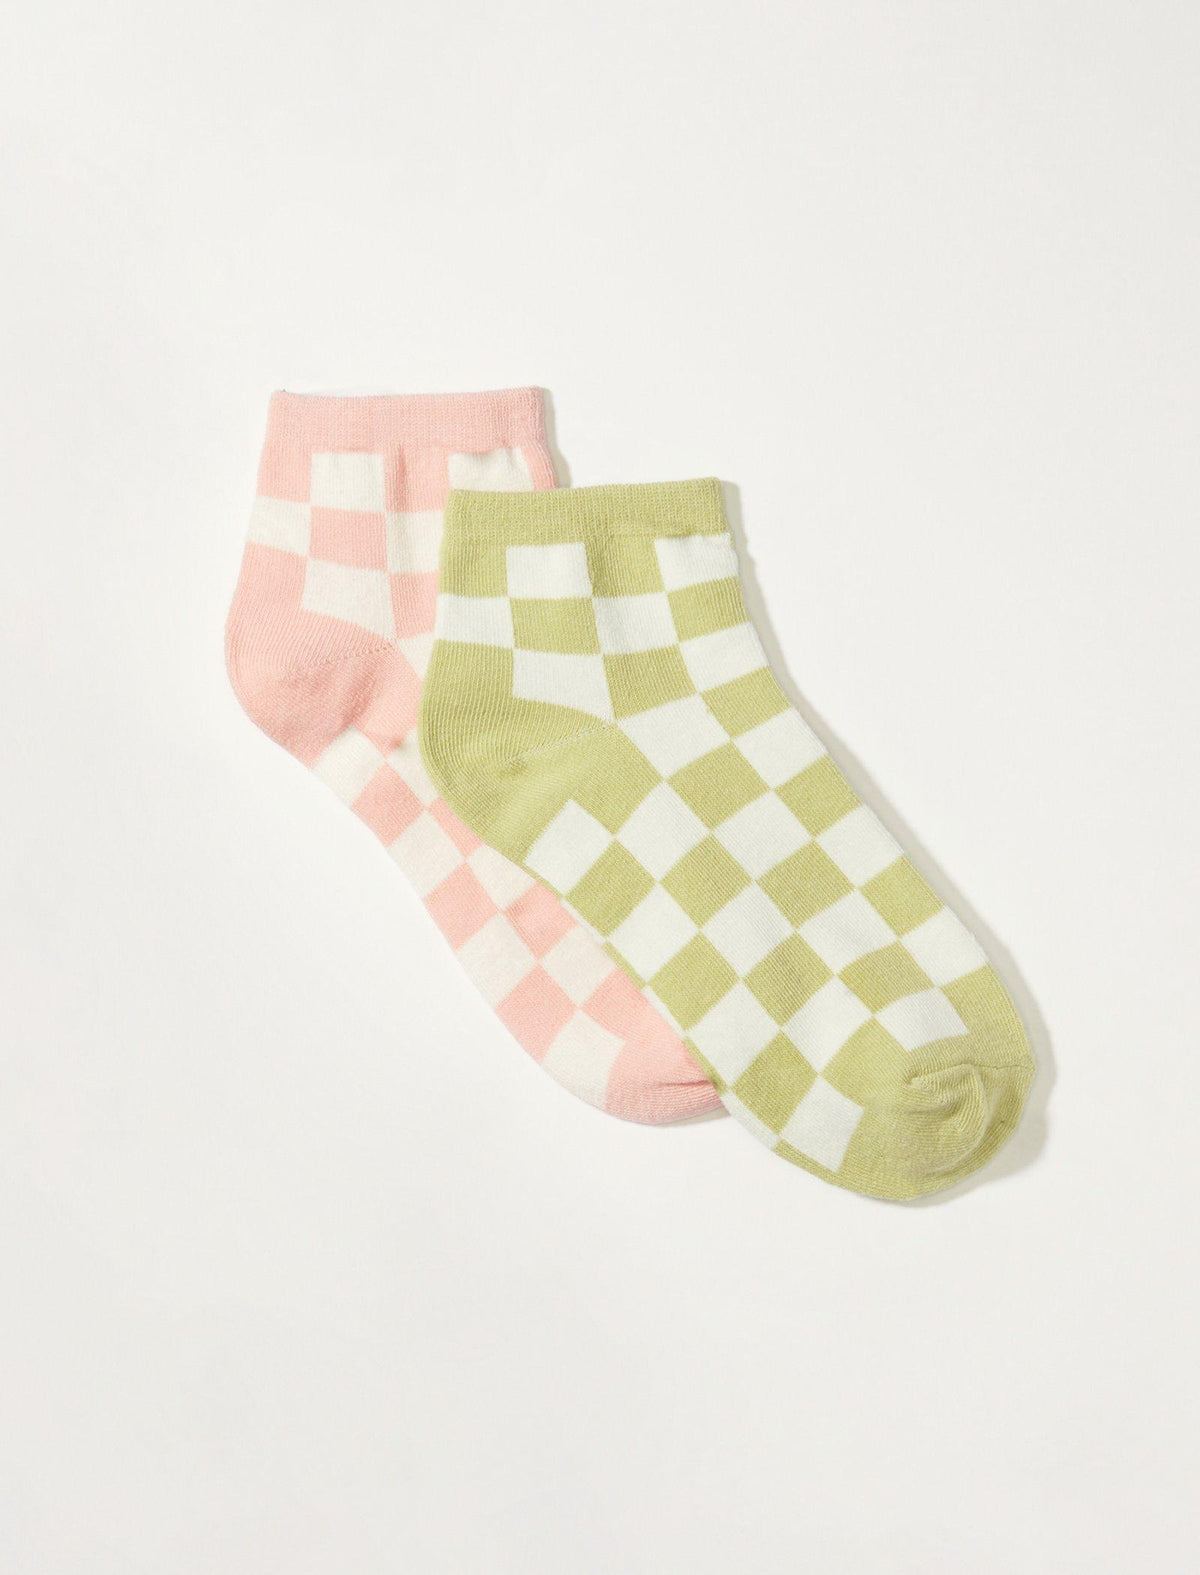 Lucky Brand Checkered Ped Sock 2 Pk - Women's Ladies Accessories Ankle Socks Light Pink